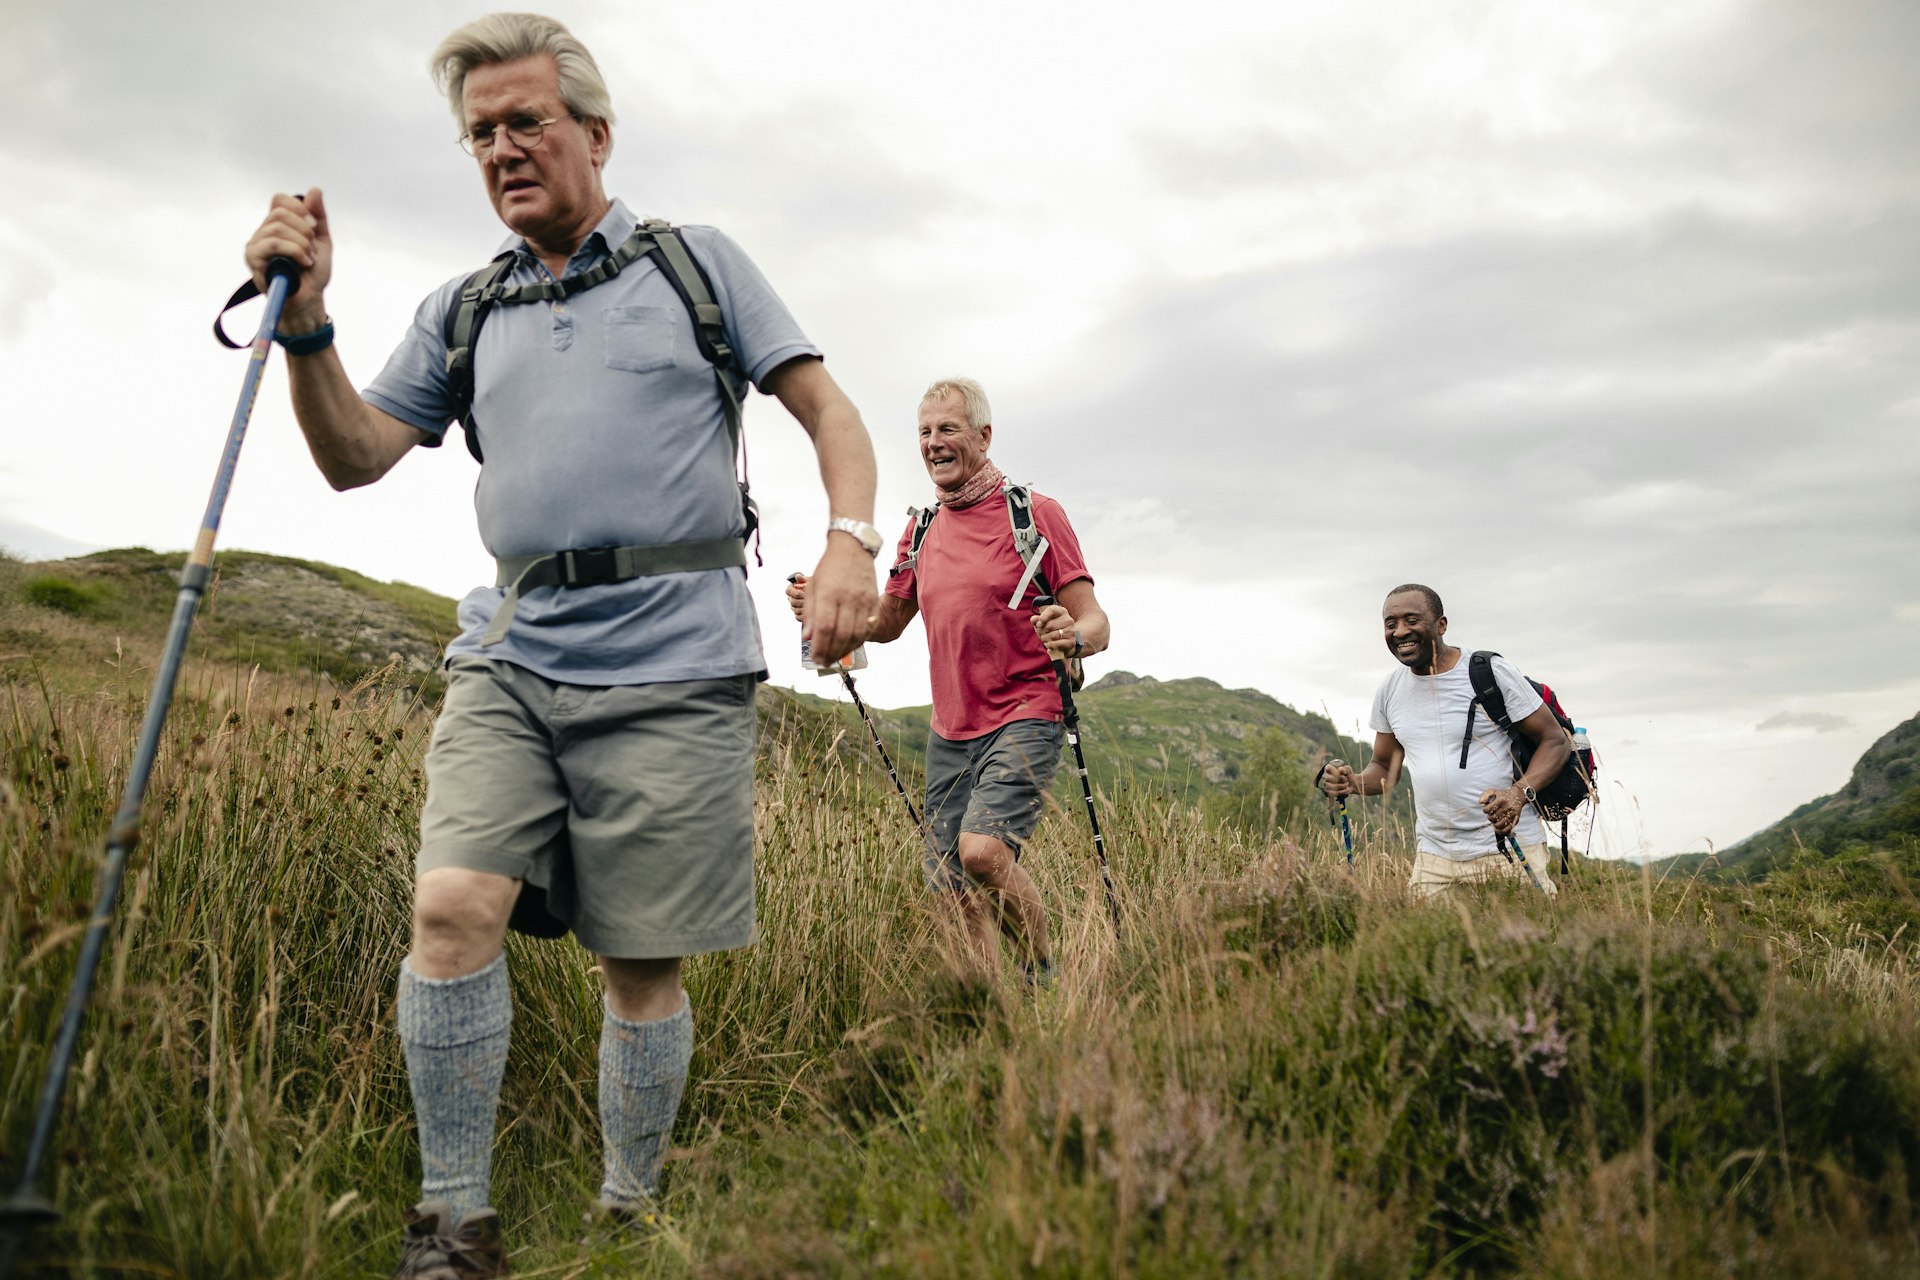 Group of Senior Men Hiking With Sticks Through Grassy Hills in the Lake District